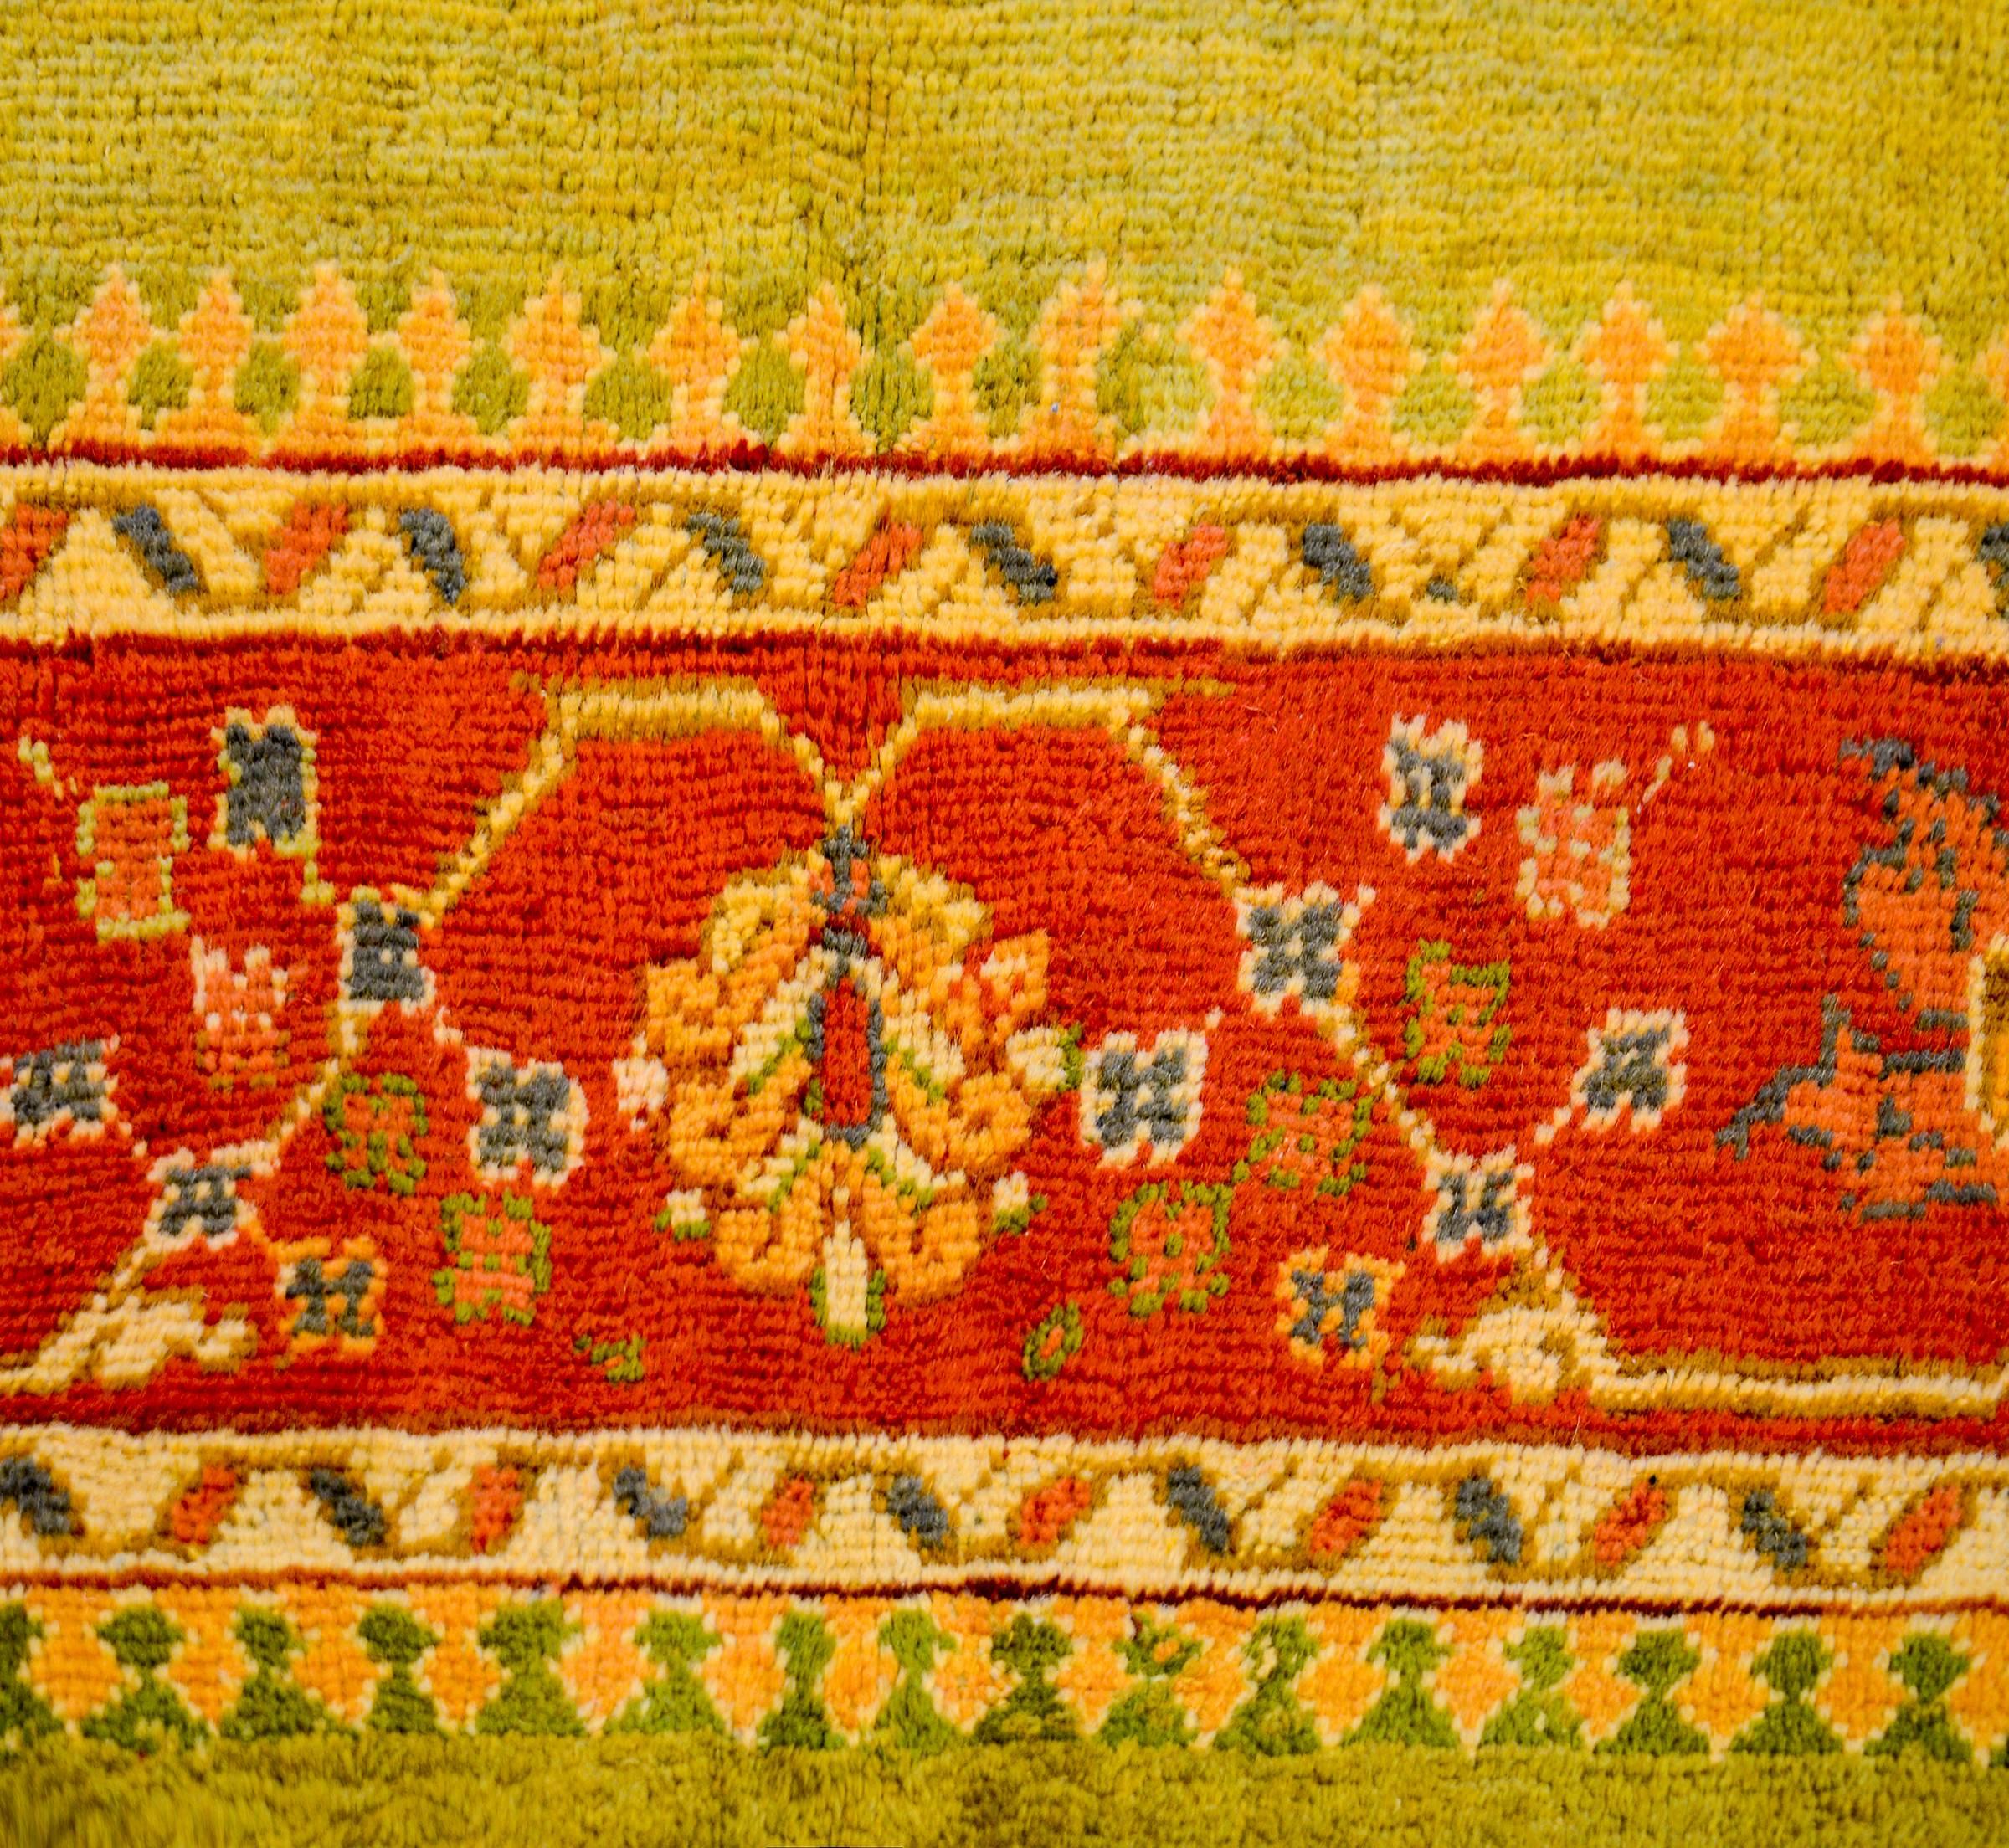 A wonderful early 20th century Turkish Oushak rug with an incredible brilliant pea green vegetable dyed wool field, surrounded by a wide crimson border with an amazing large-scale floral and vine pattern flanked by two thin geometric borders.